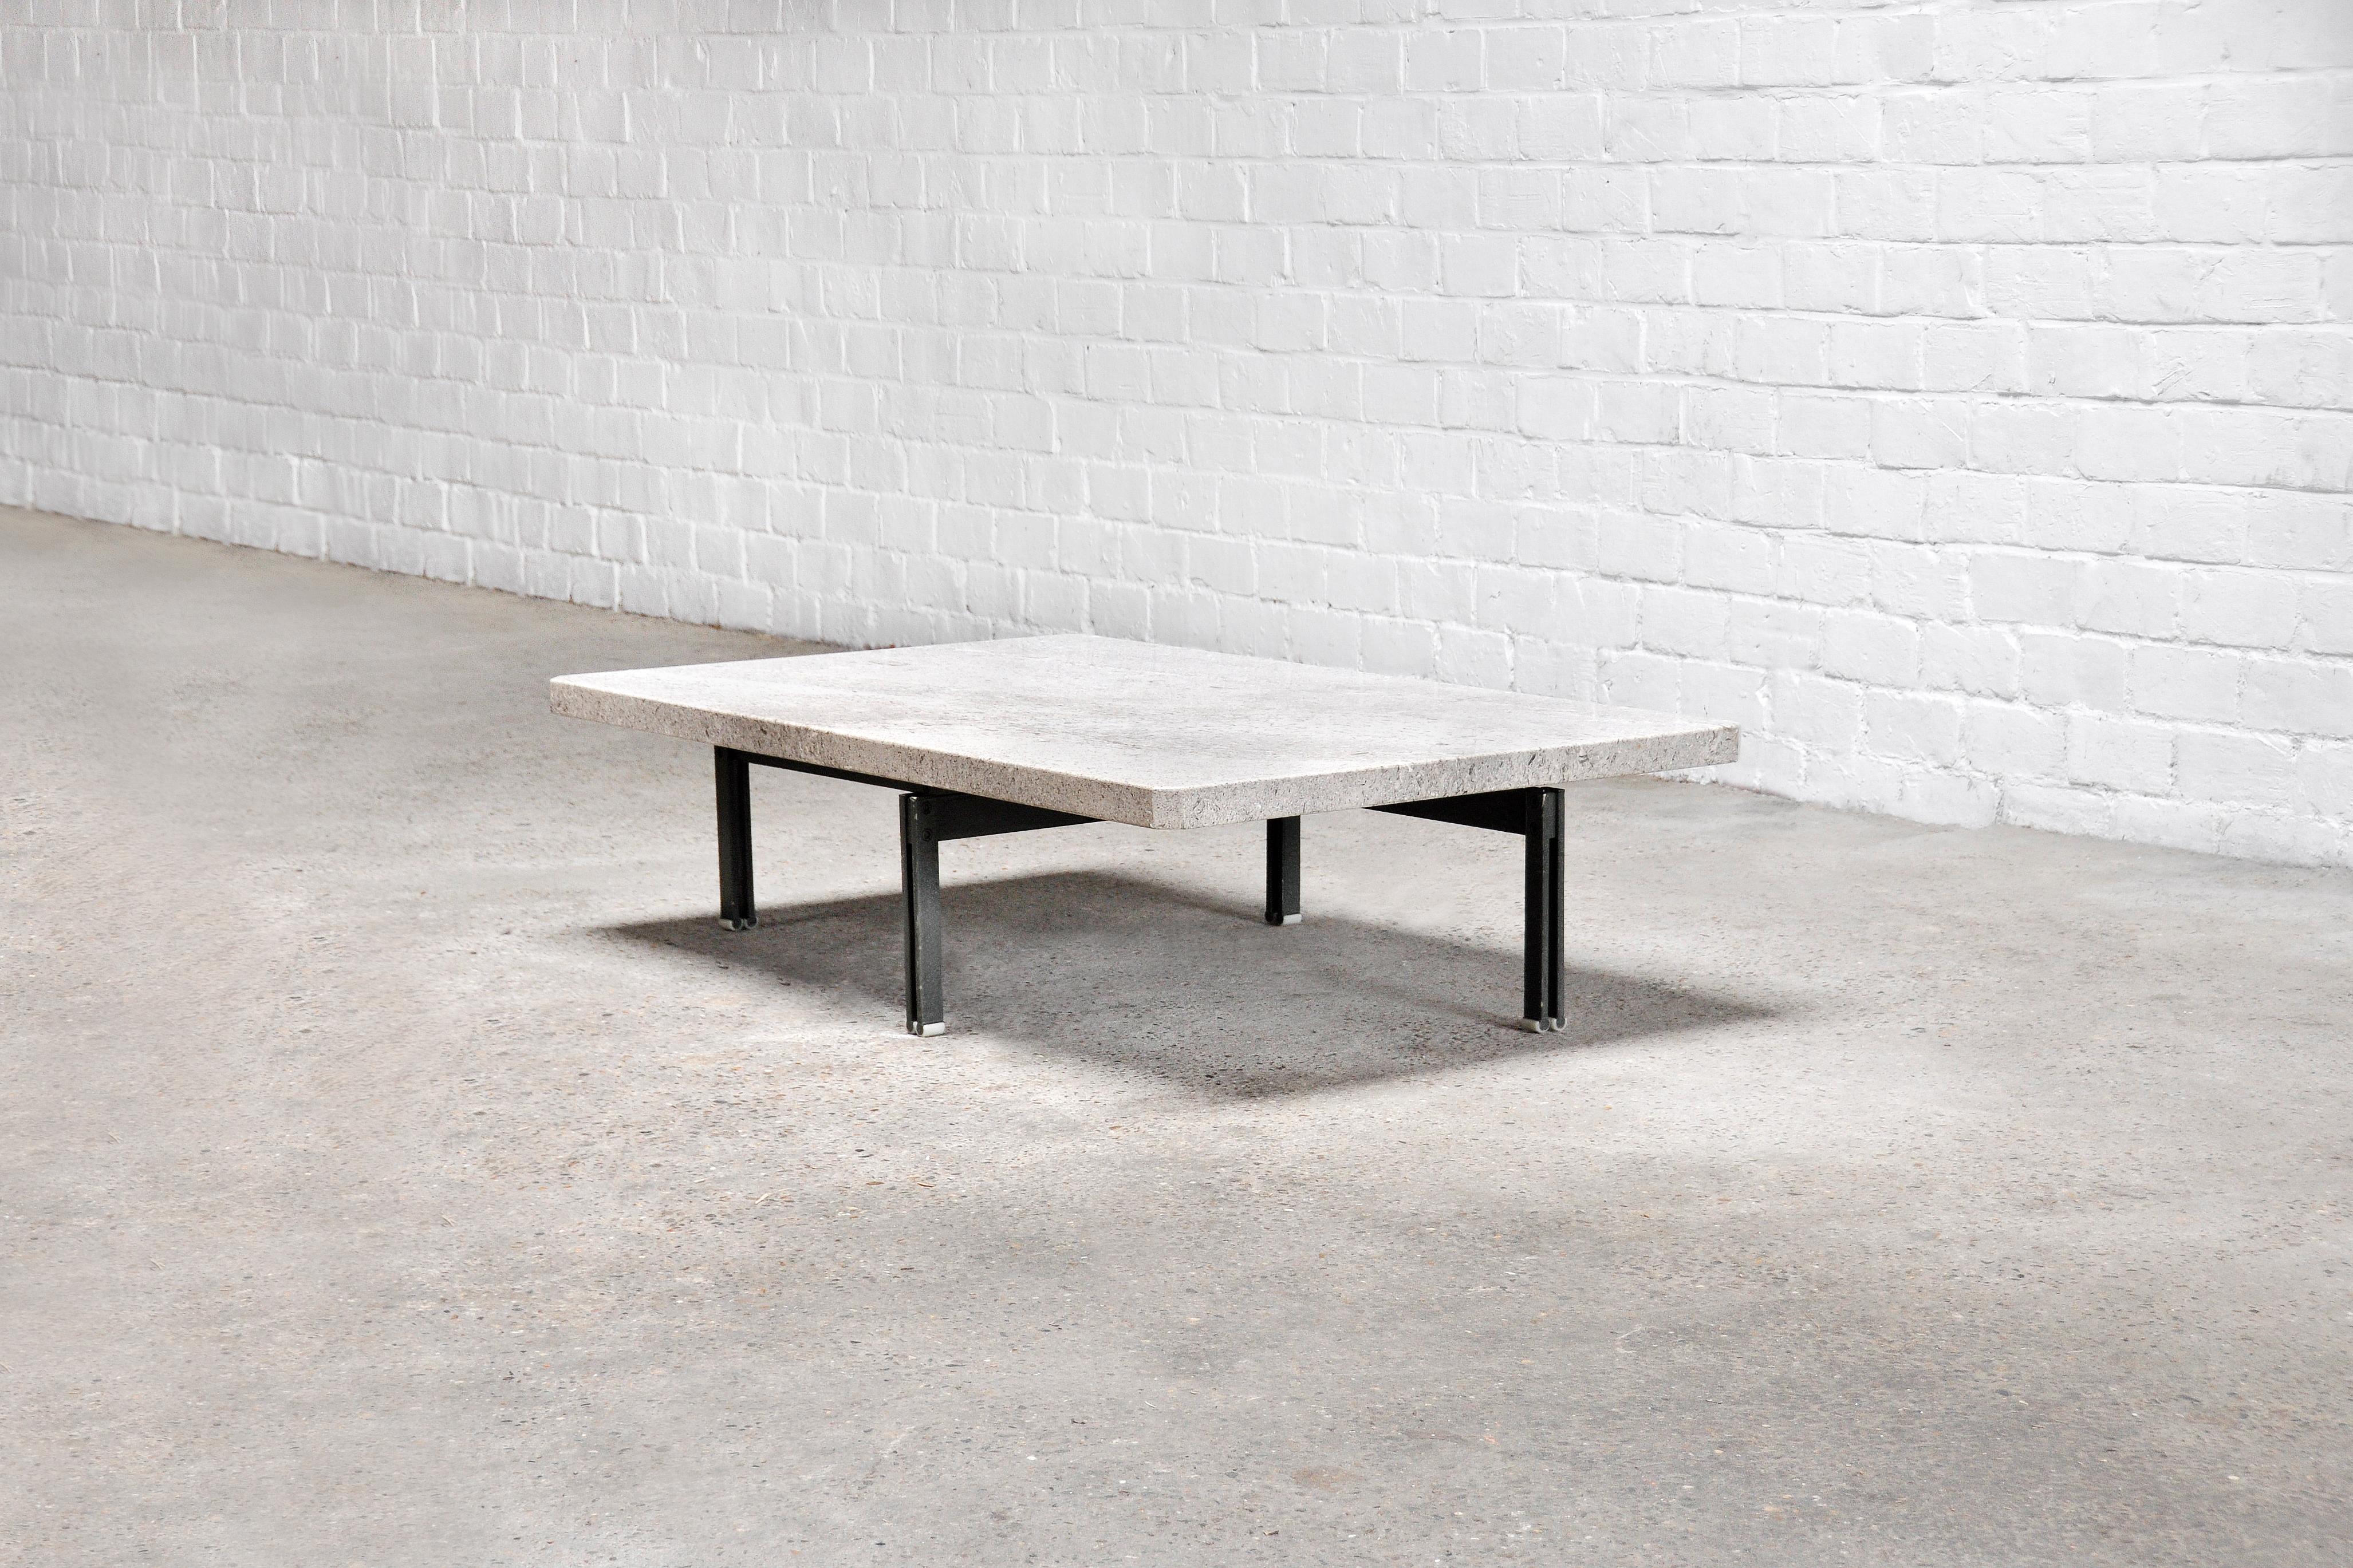 The 'Onda' coffee table was designed by Giovanni Offredi and manufactured by Saporiti in Italy in the 1970’s. This example features a dark brushed steel base and a light grey granite top. This original modernist design receives an